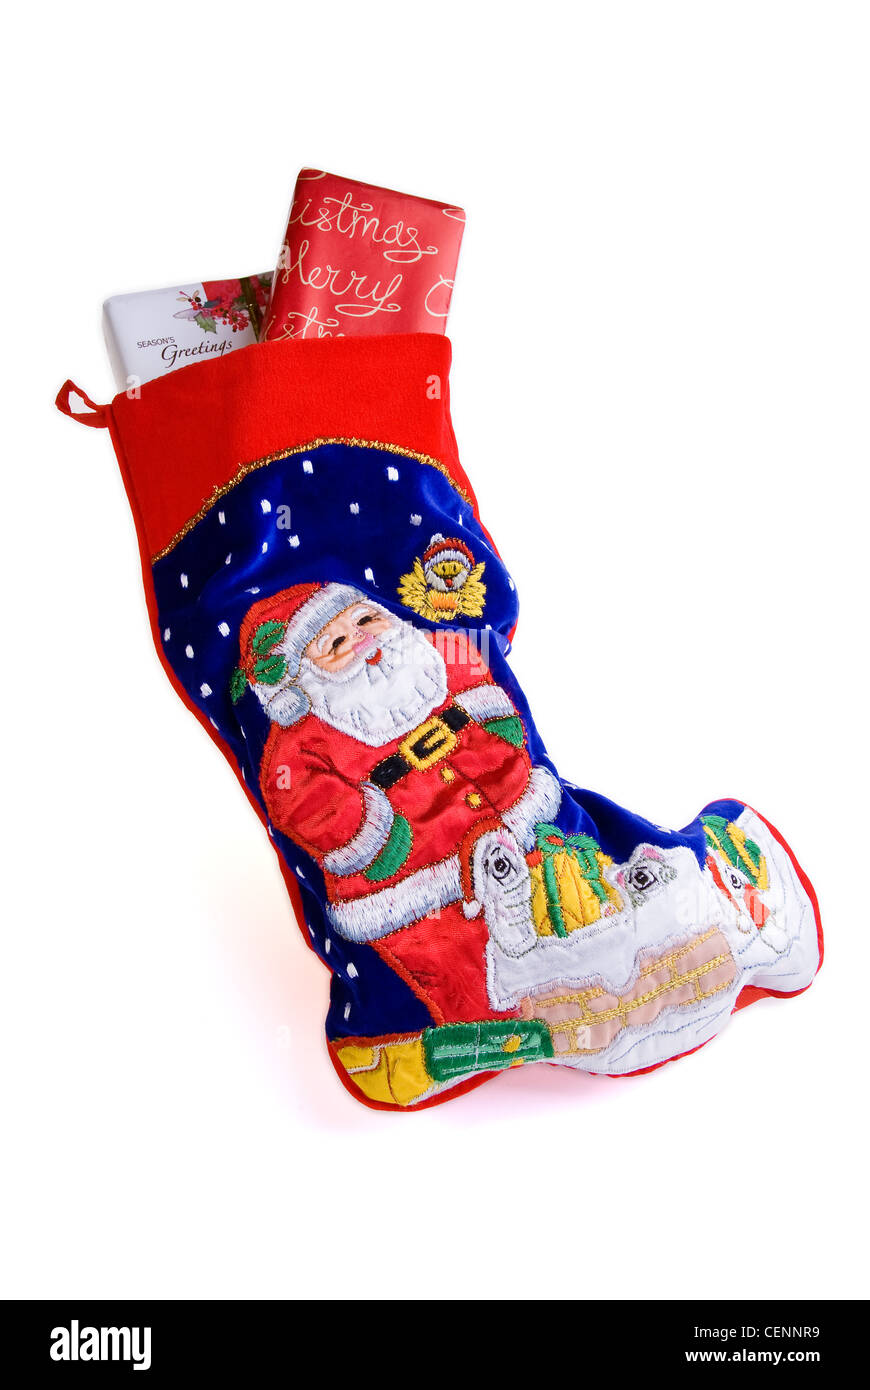 Traditional Christmas stocking with wrapped gifts. Stock Photo